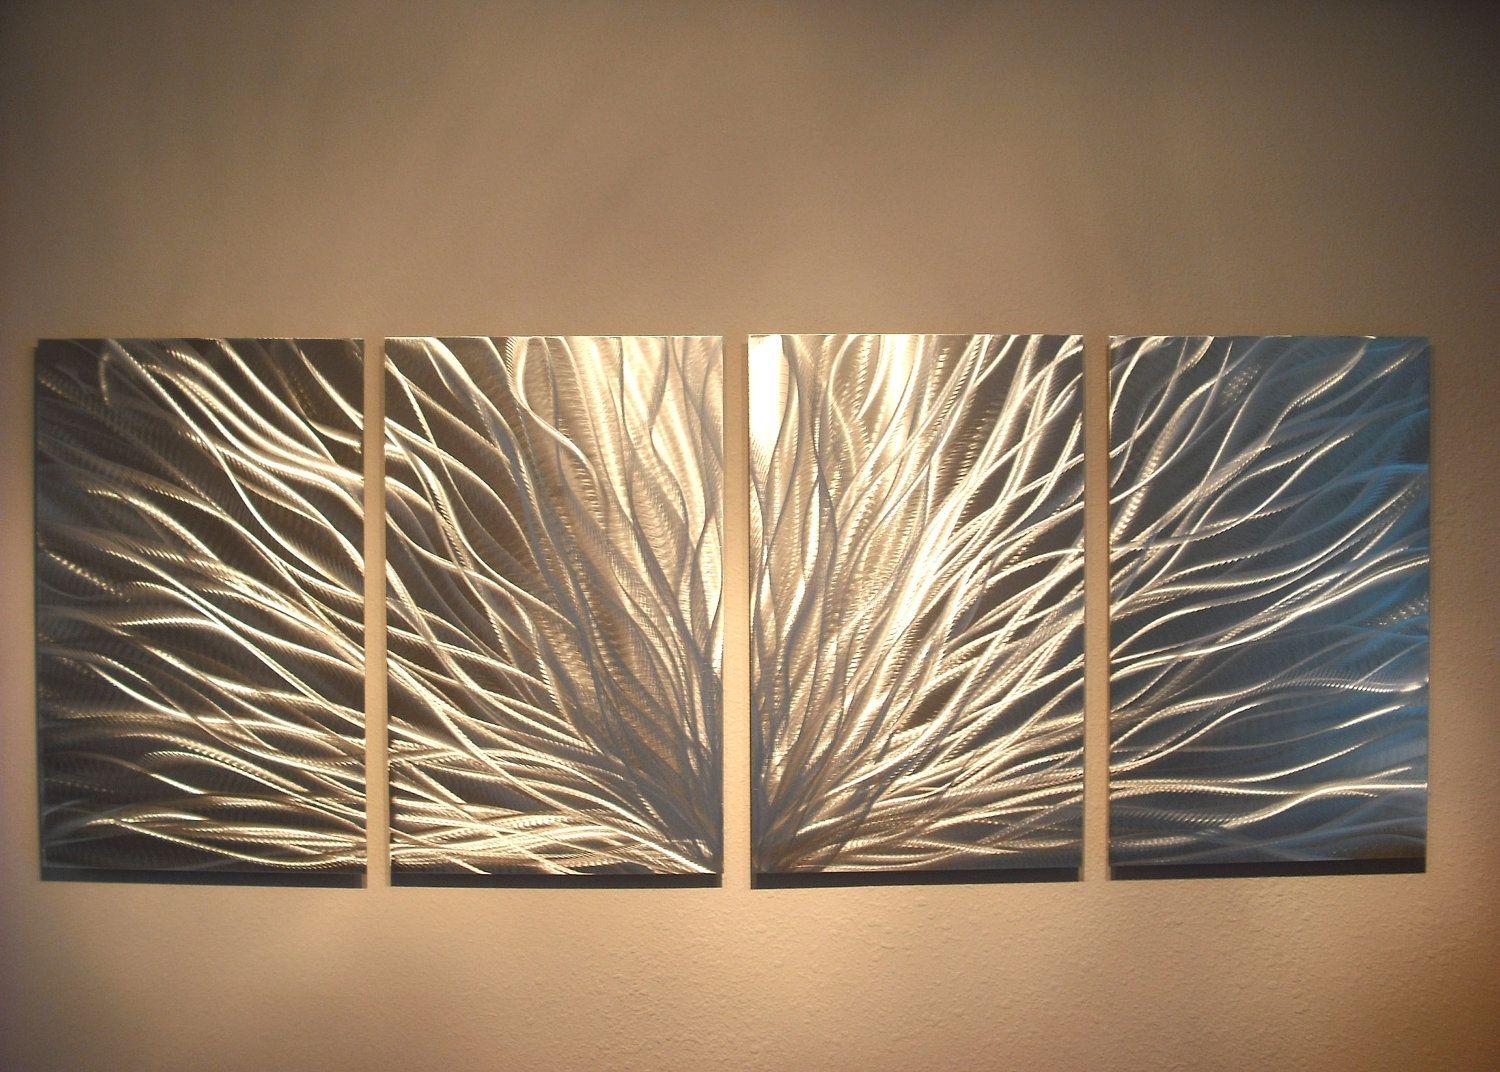 Radiance – Abstract Metal Wall Art Contemporary Modern Decor With Regard To Latest Metal Wall Art Decors (View 1 of 15)